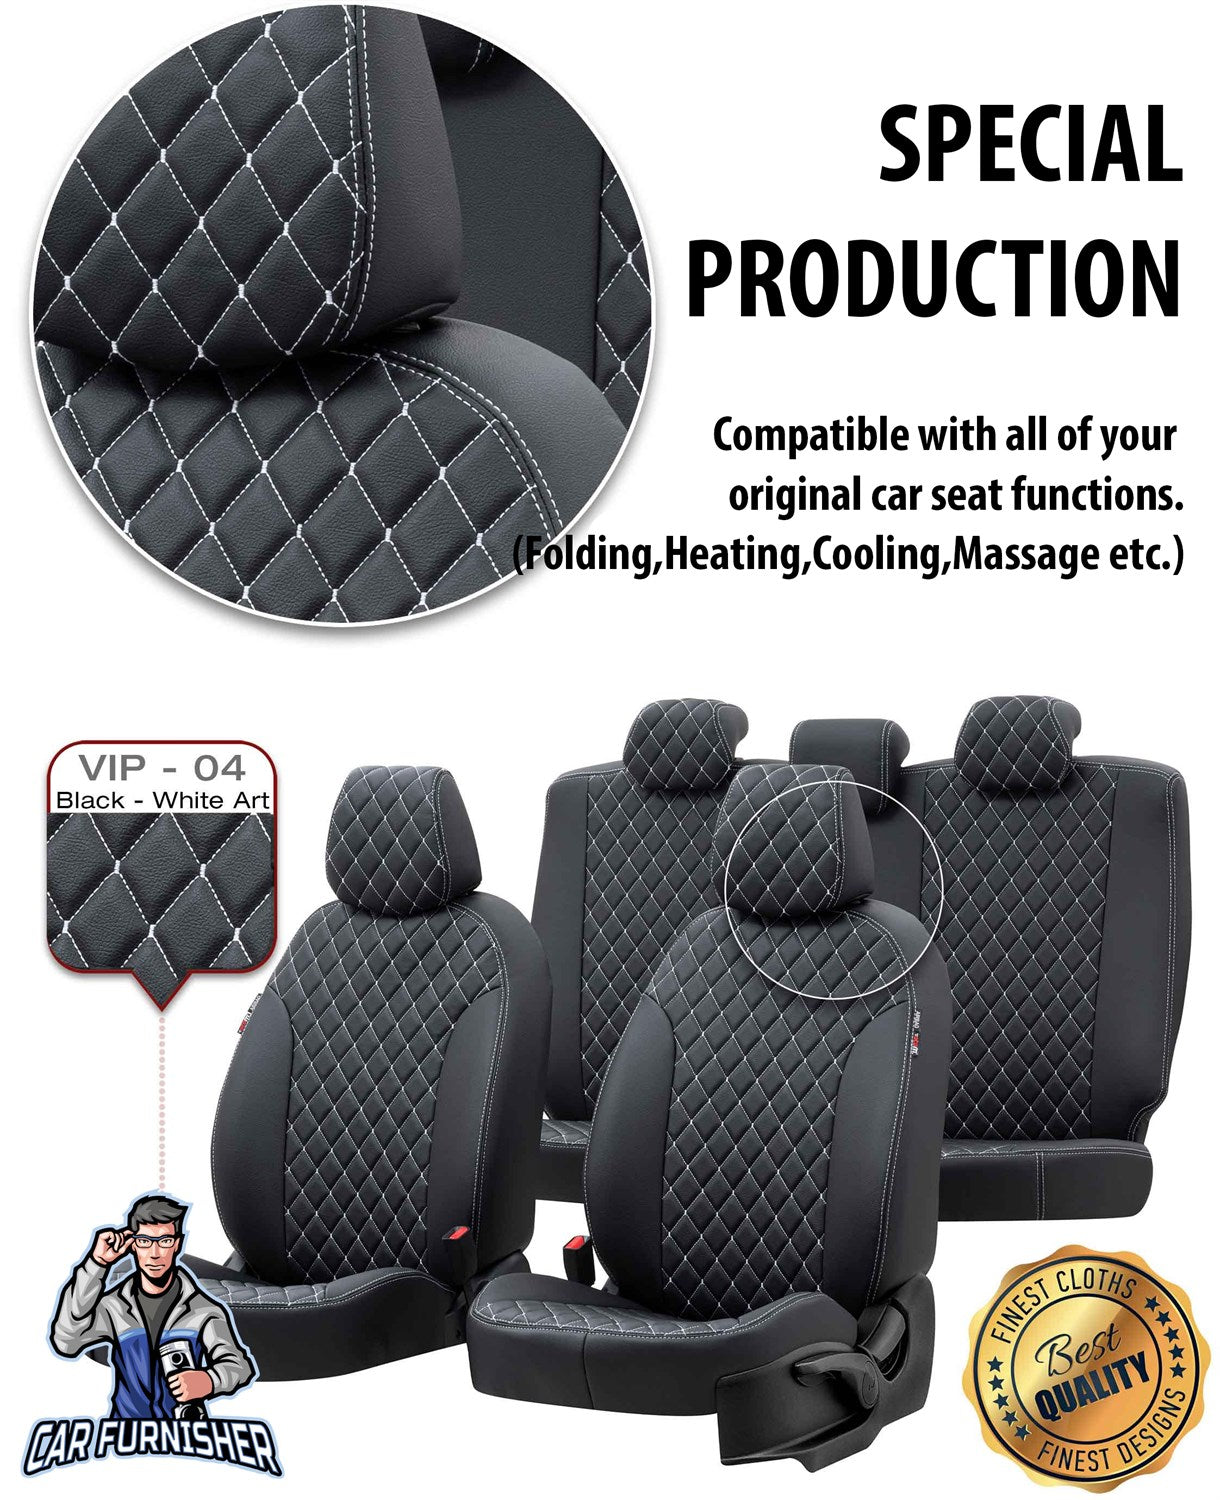 Renault Broadway Seat Covers Madrid Leather Design Dark Gray Leather